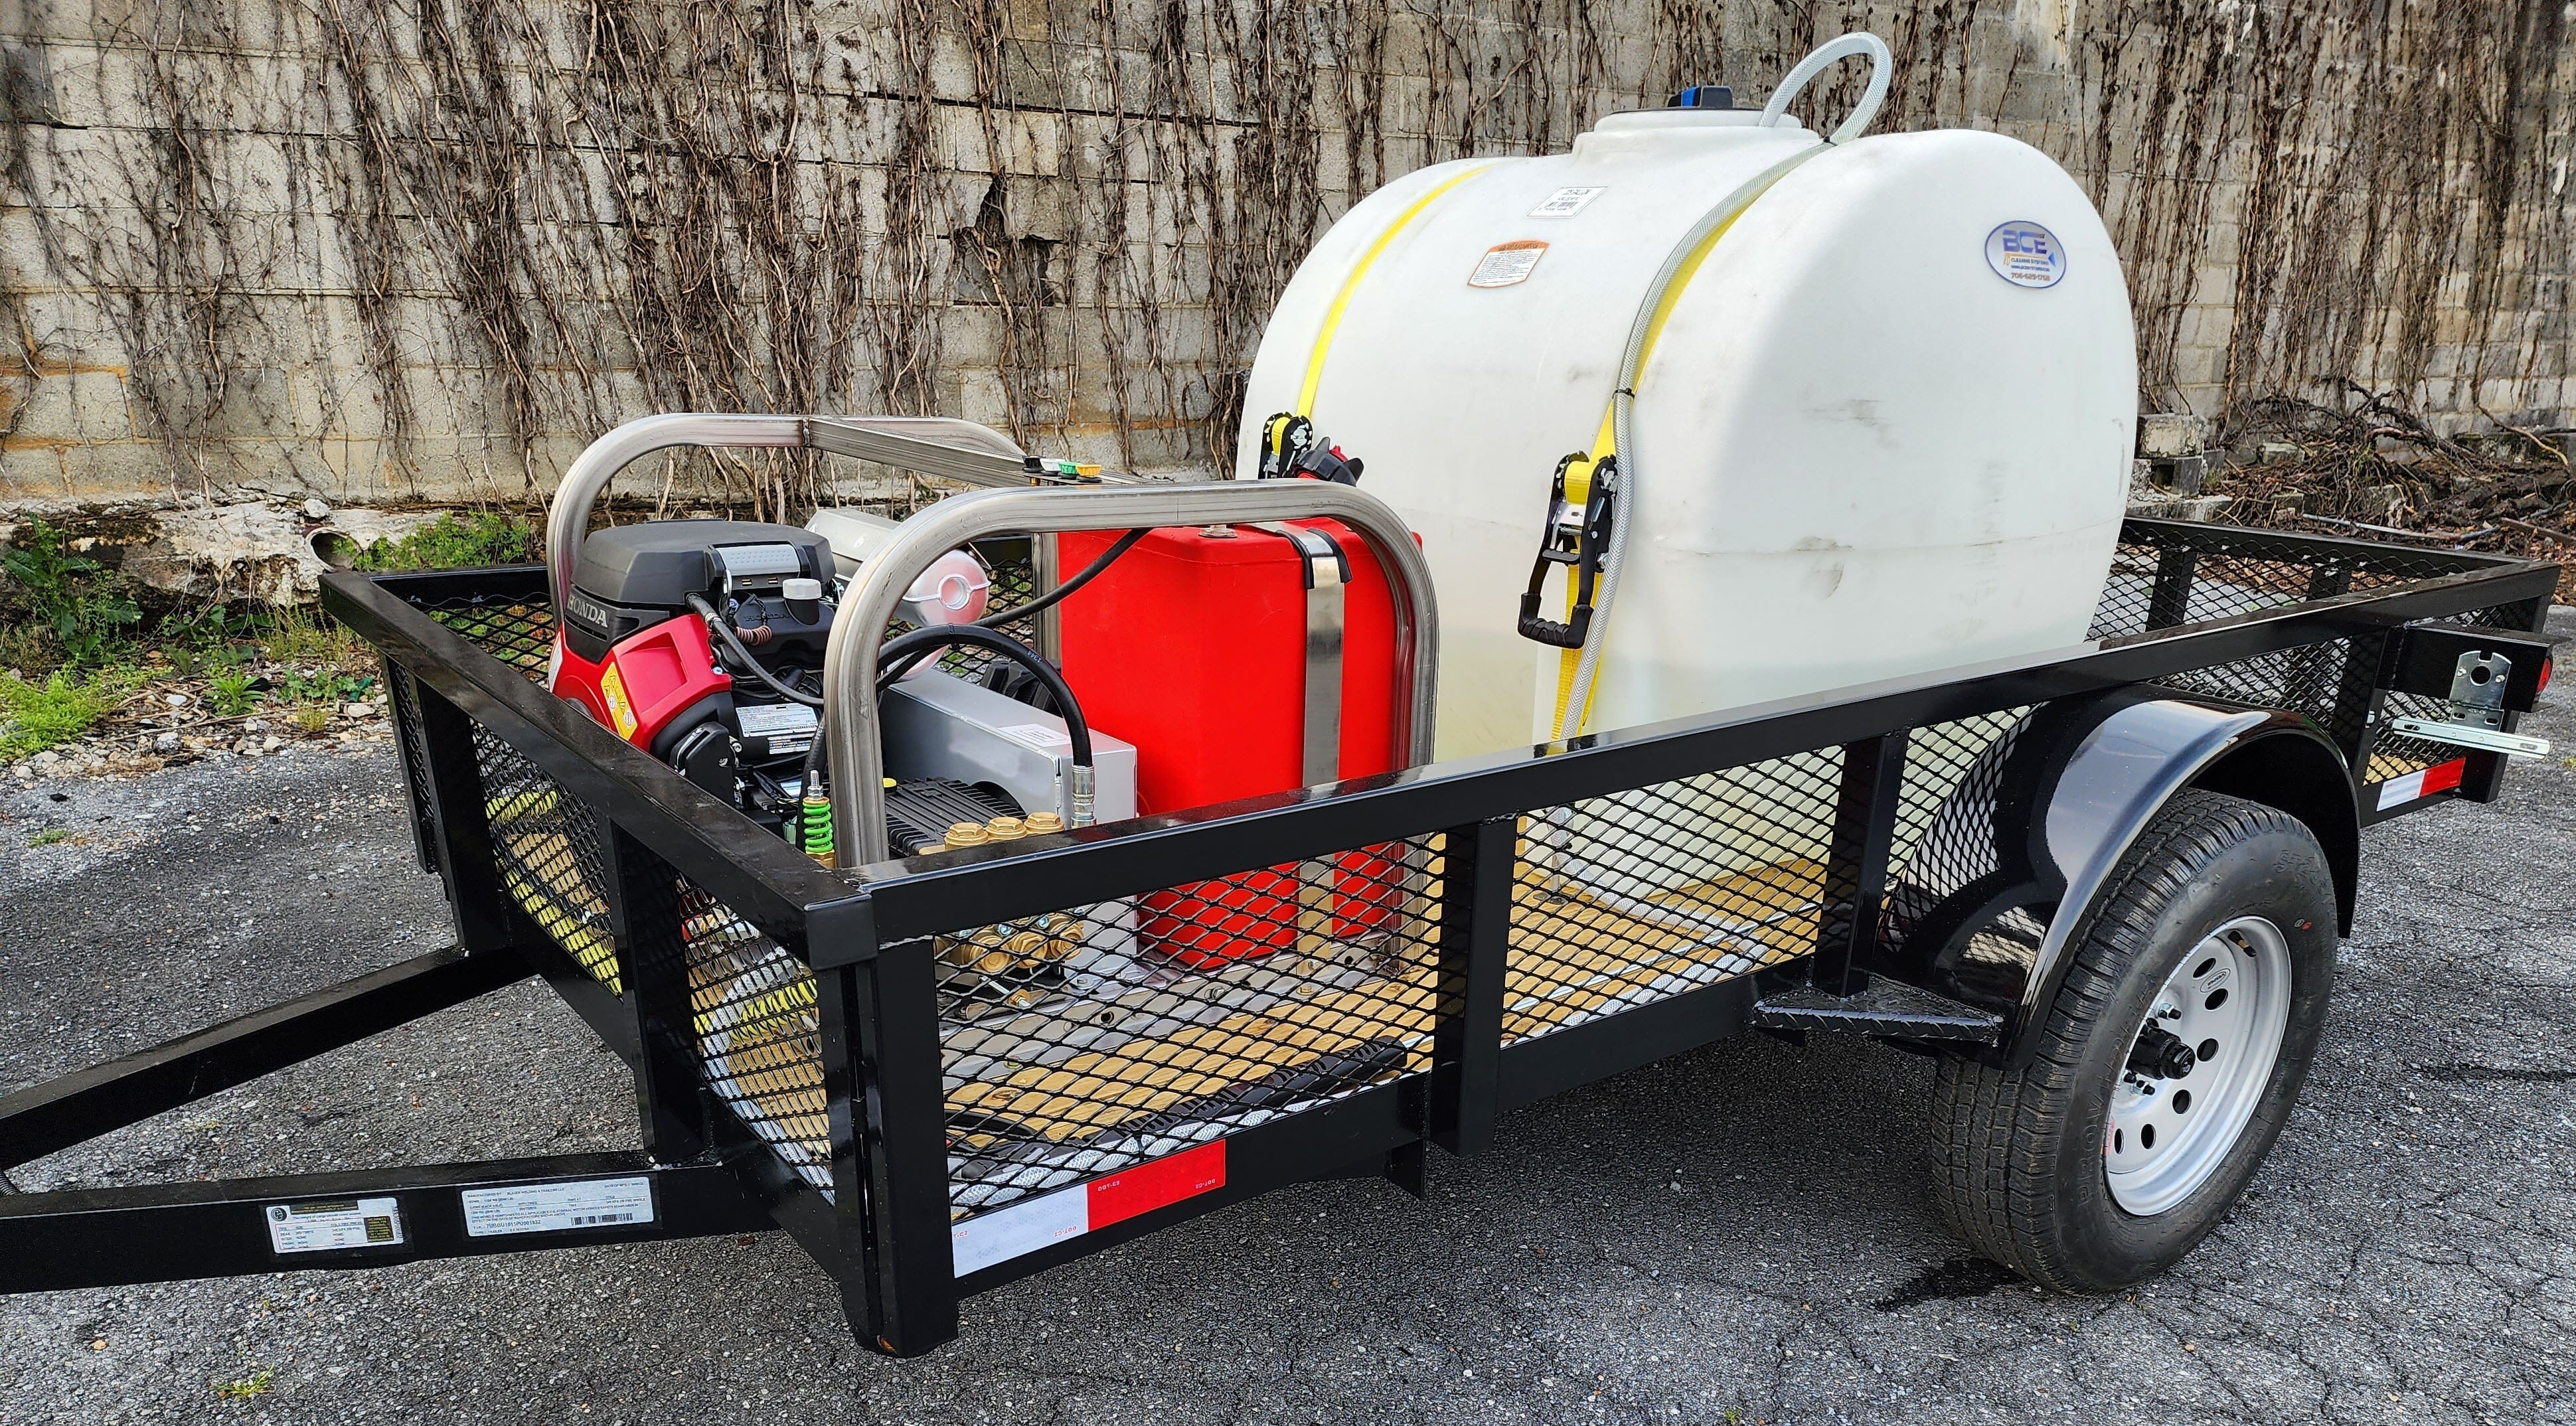 Hydro Max -10gpm at 3000psi Cold Water Trailer Package -Single Axle BCE Cleaning Systems 